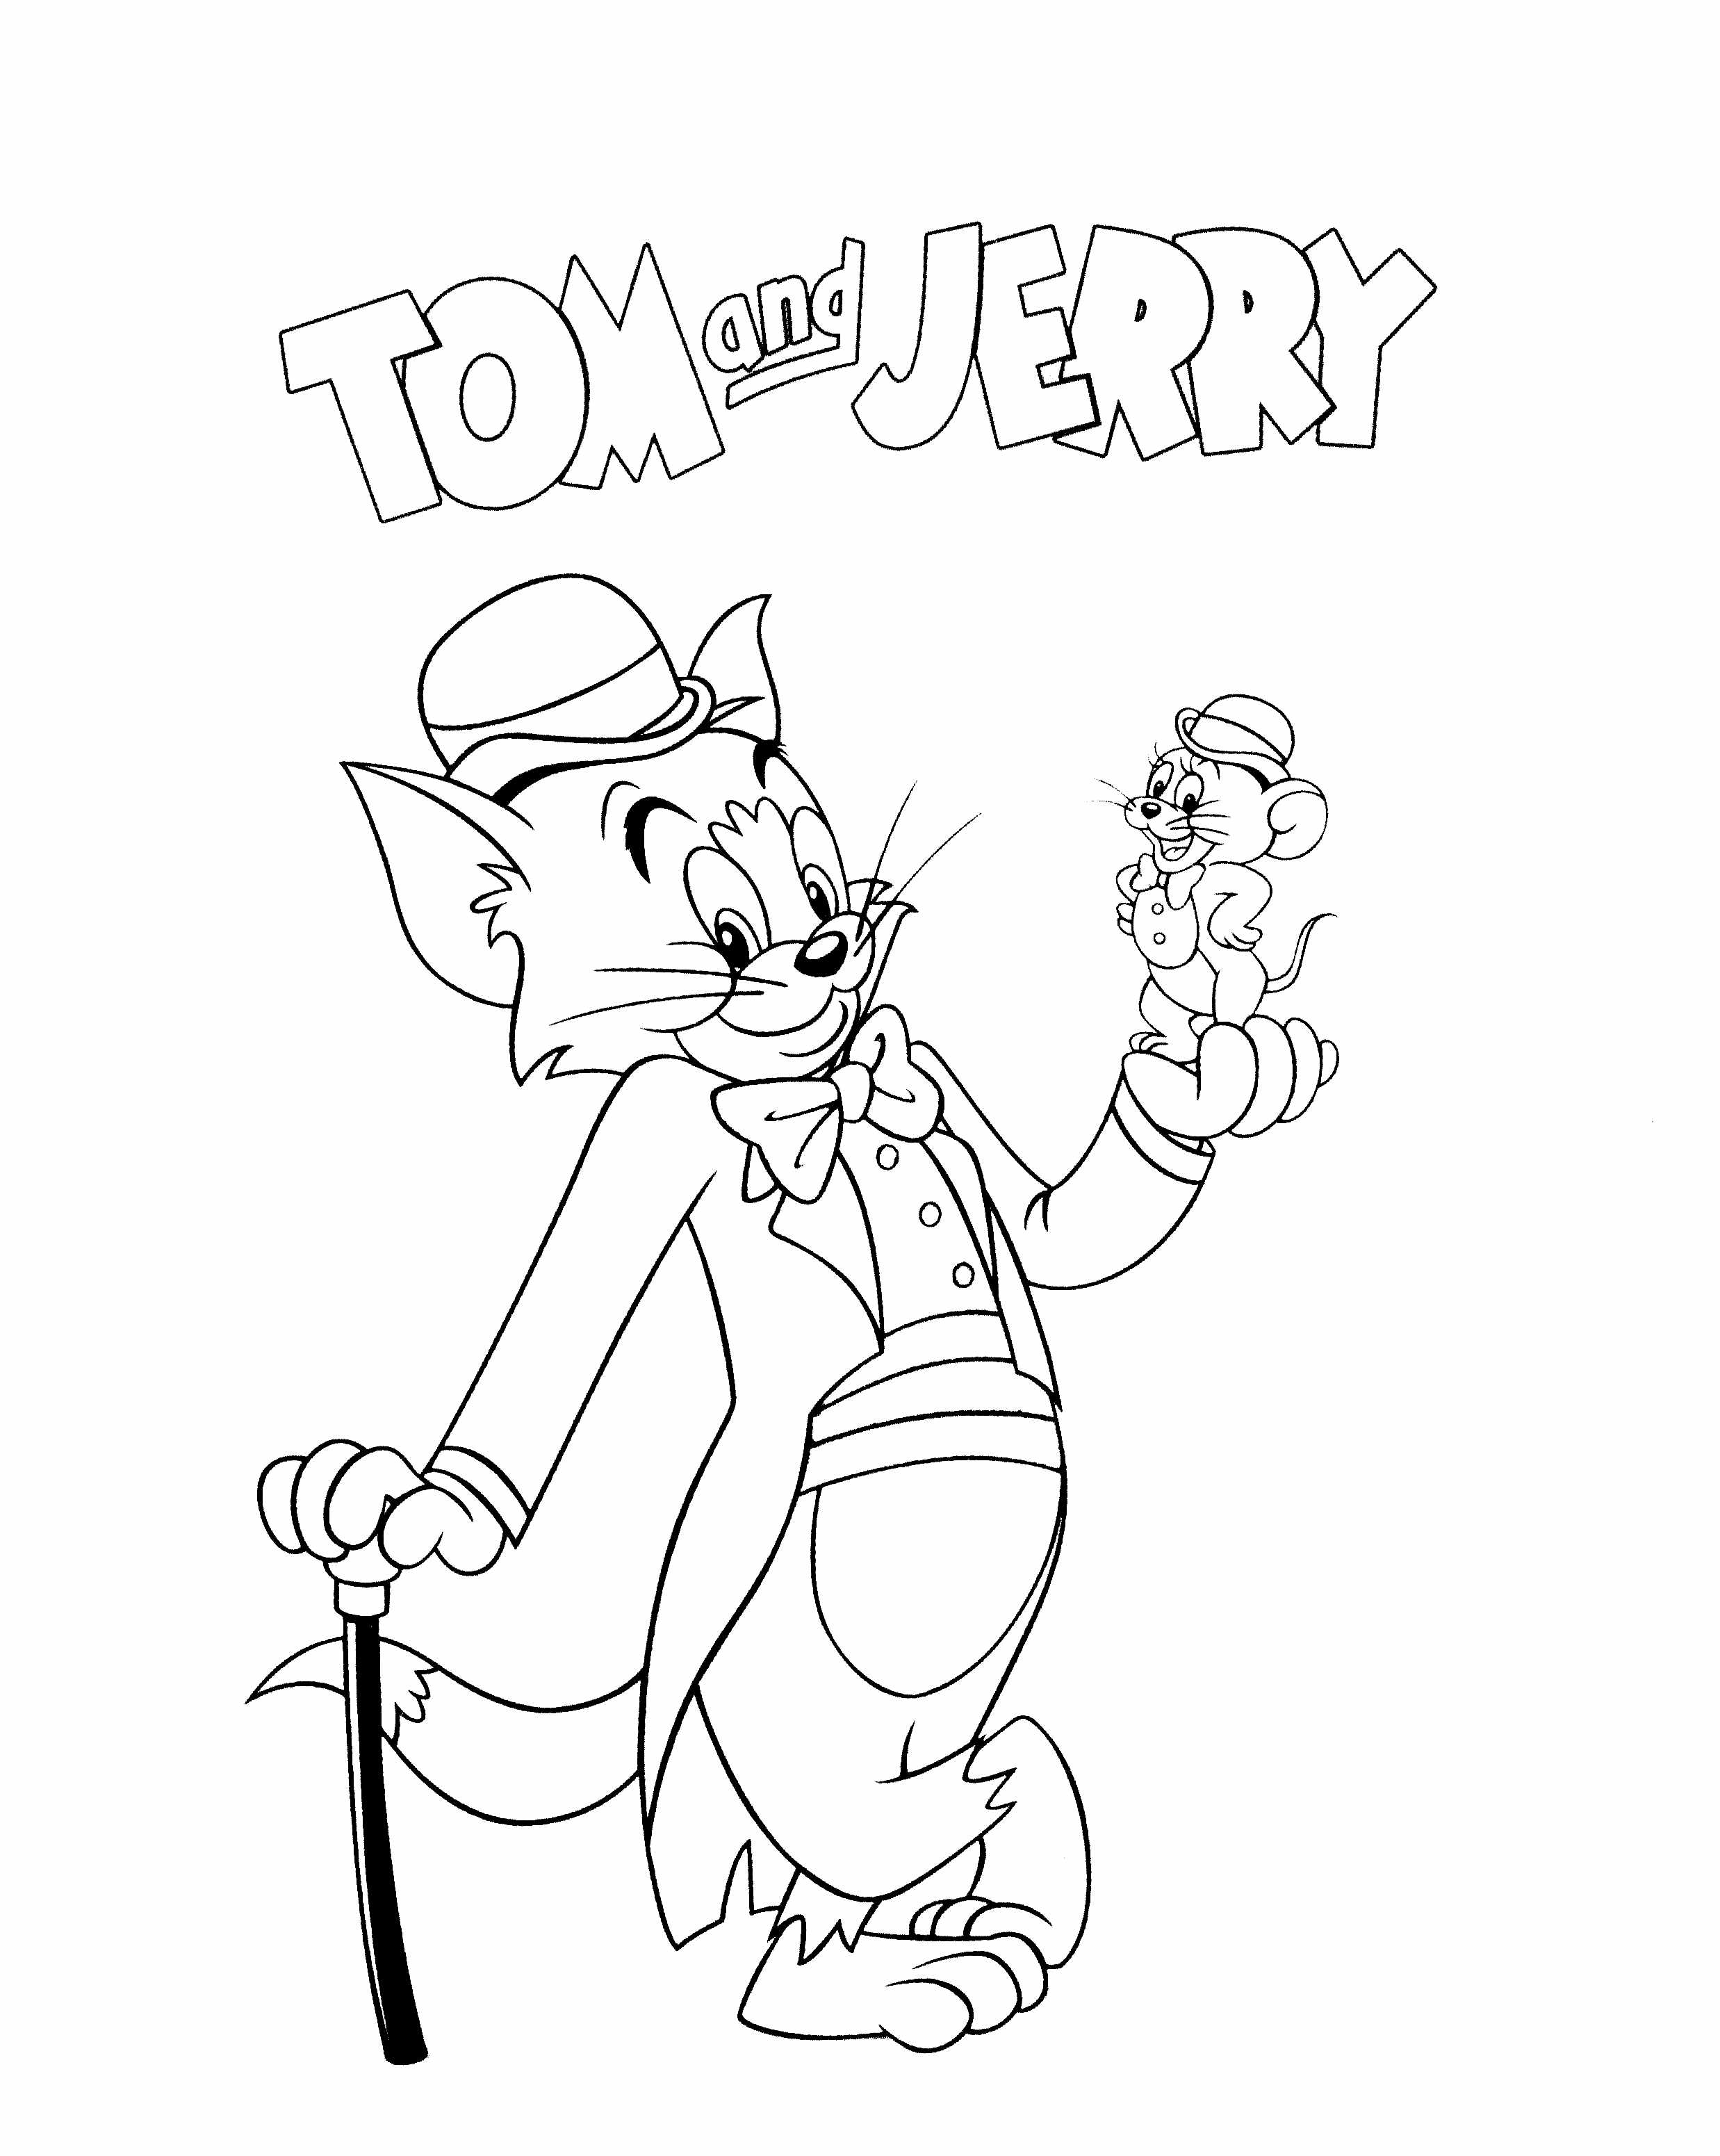 How to draw happy Tom | Easy drawings, Cartoon drawings, Tom and jerry  drawing